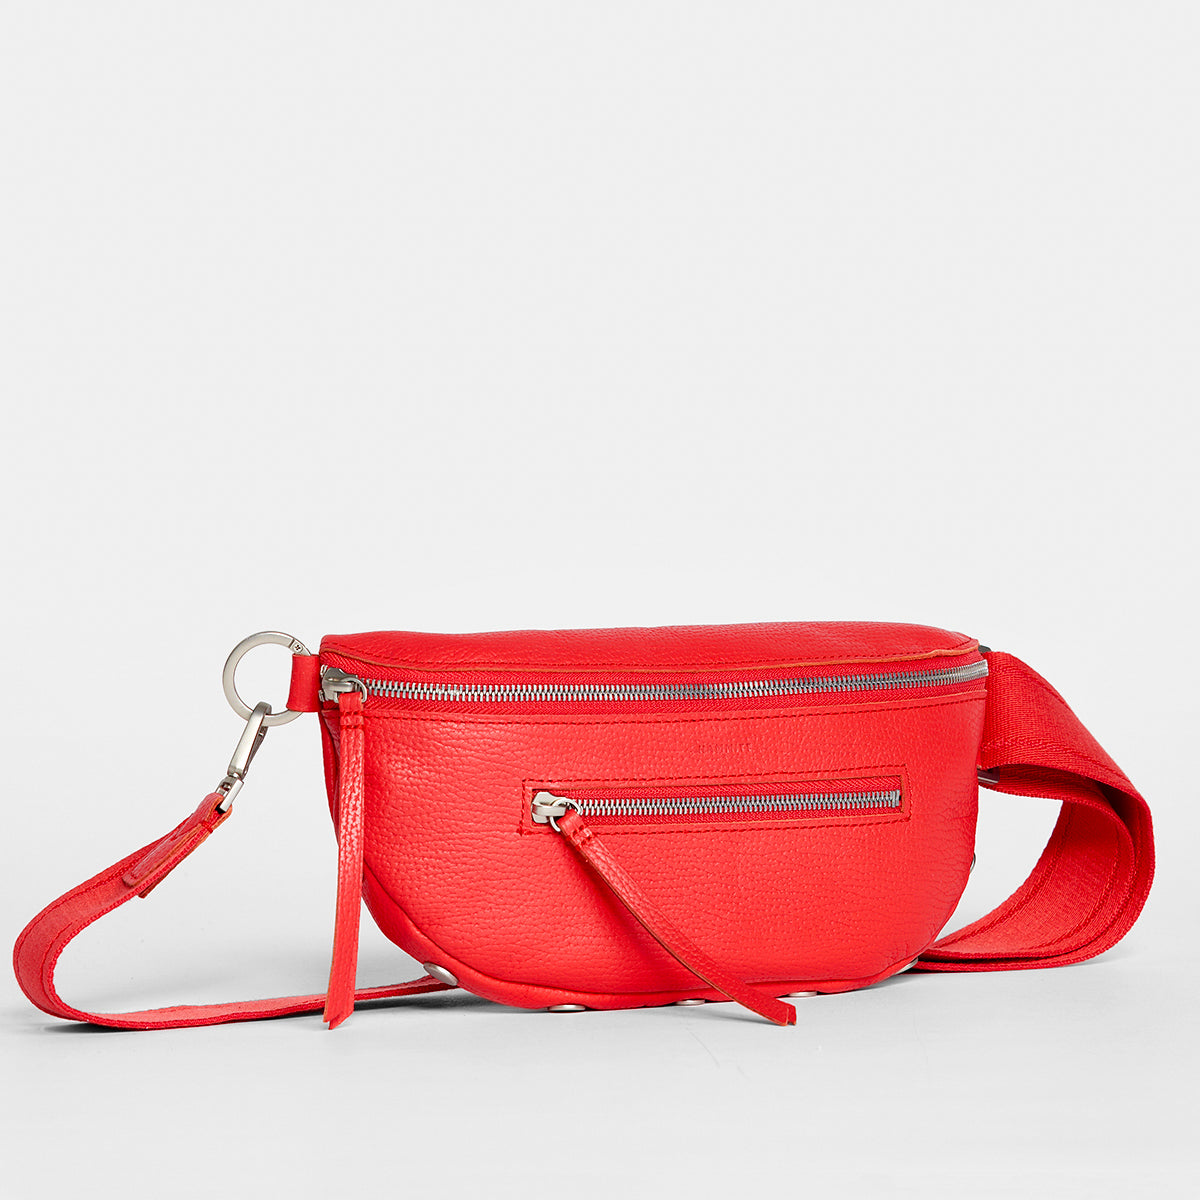 Charles-Crossbody-Med-Lighthouse-Red-Front-Angled-View